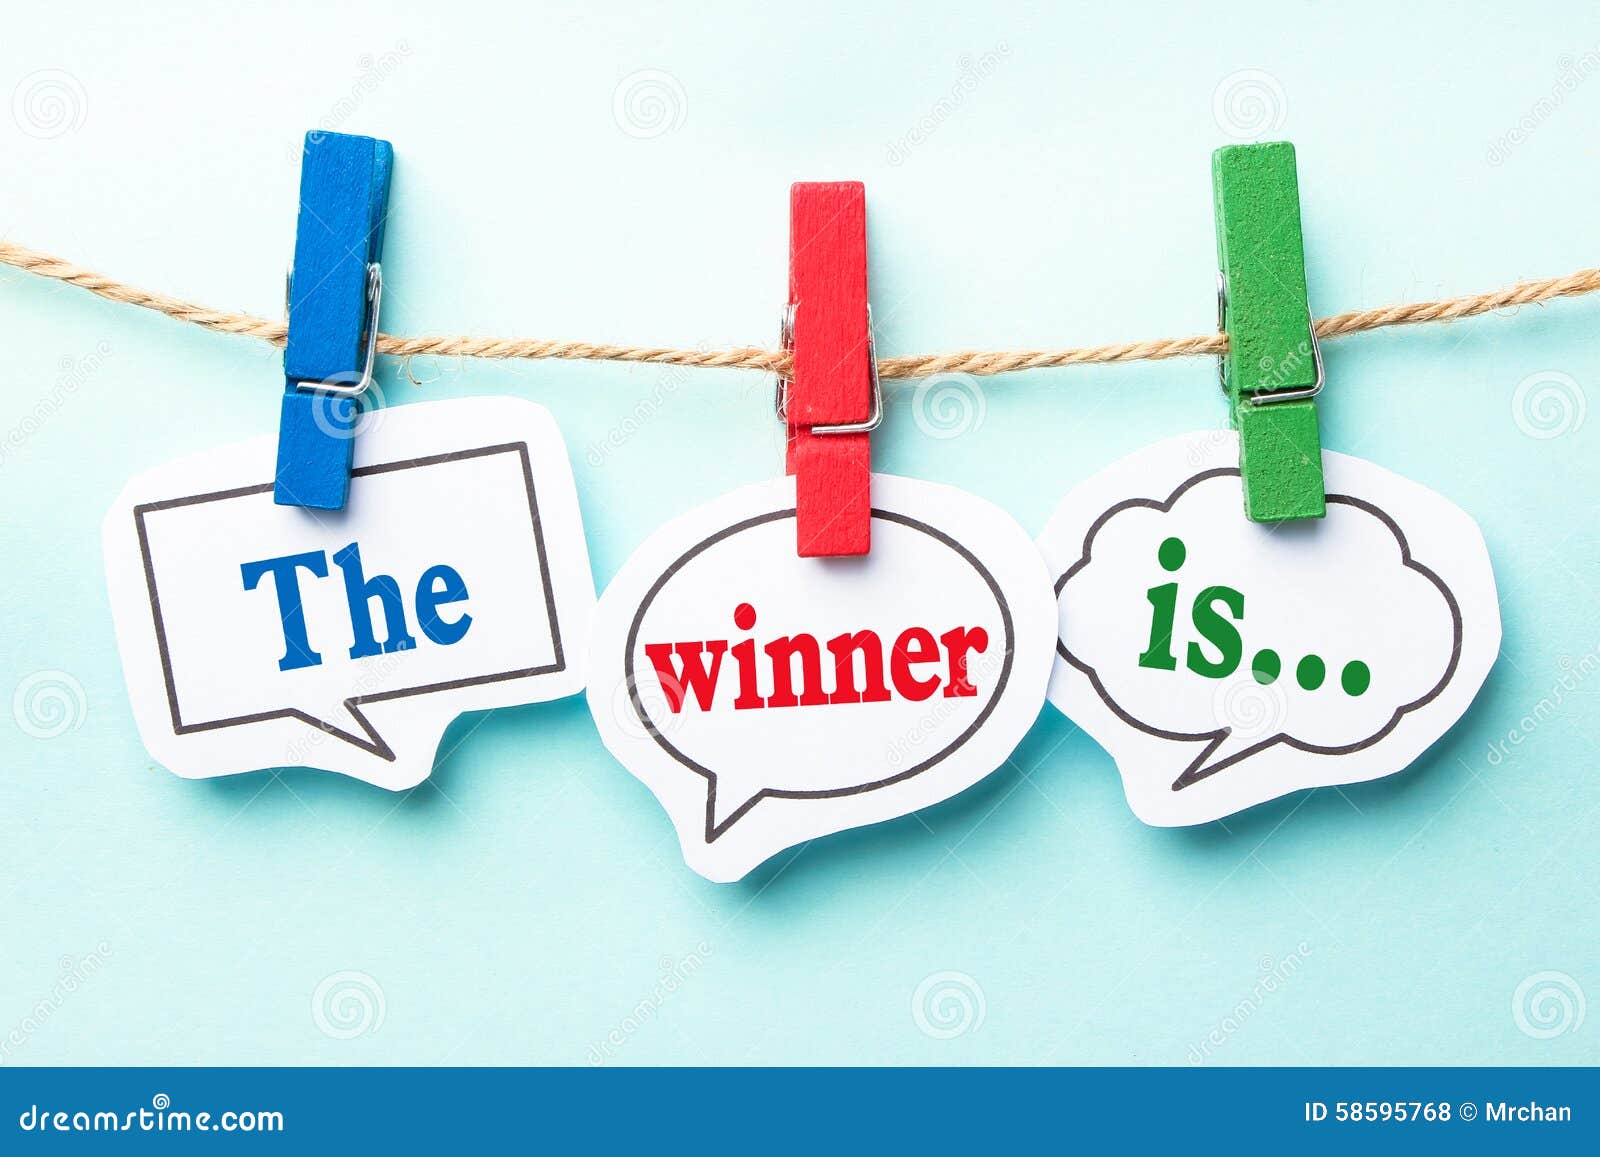 454 477 Winner Photos Free Royalty Free Stock Photos From Dreamstime